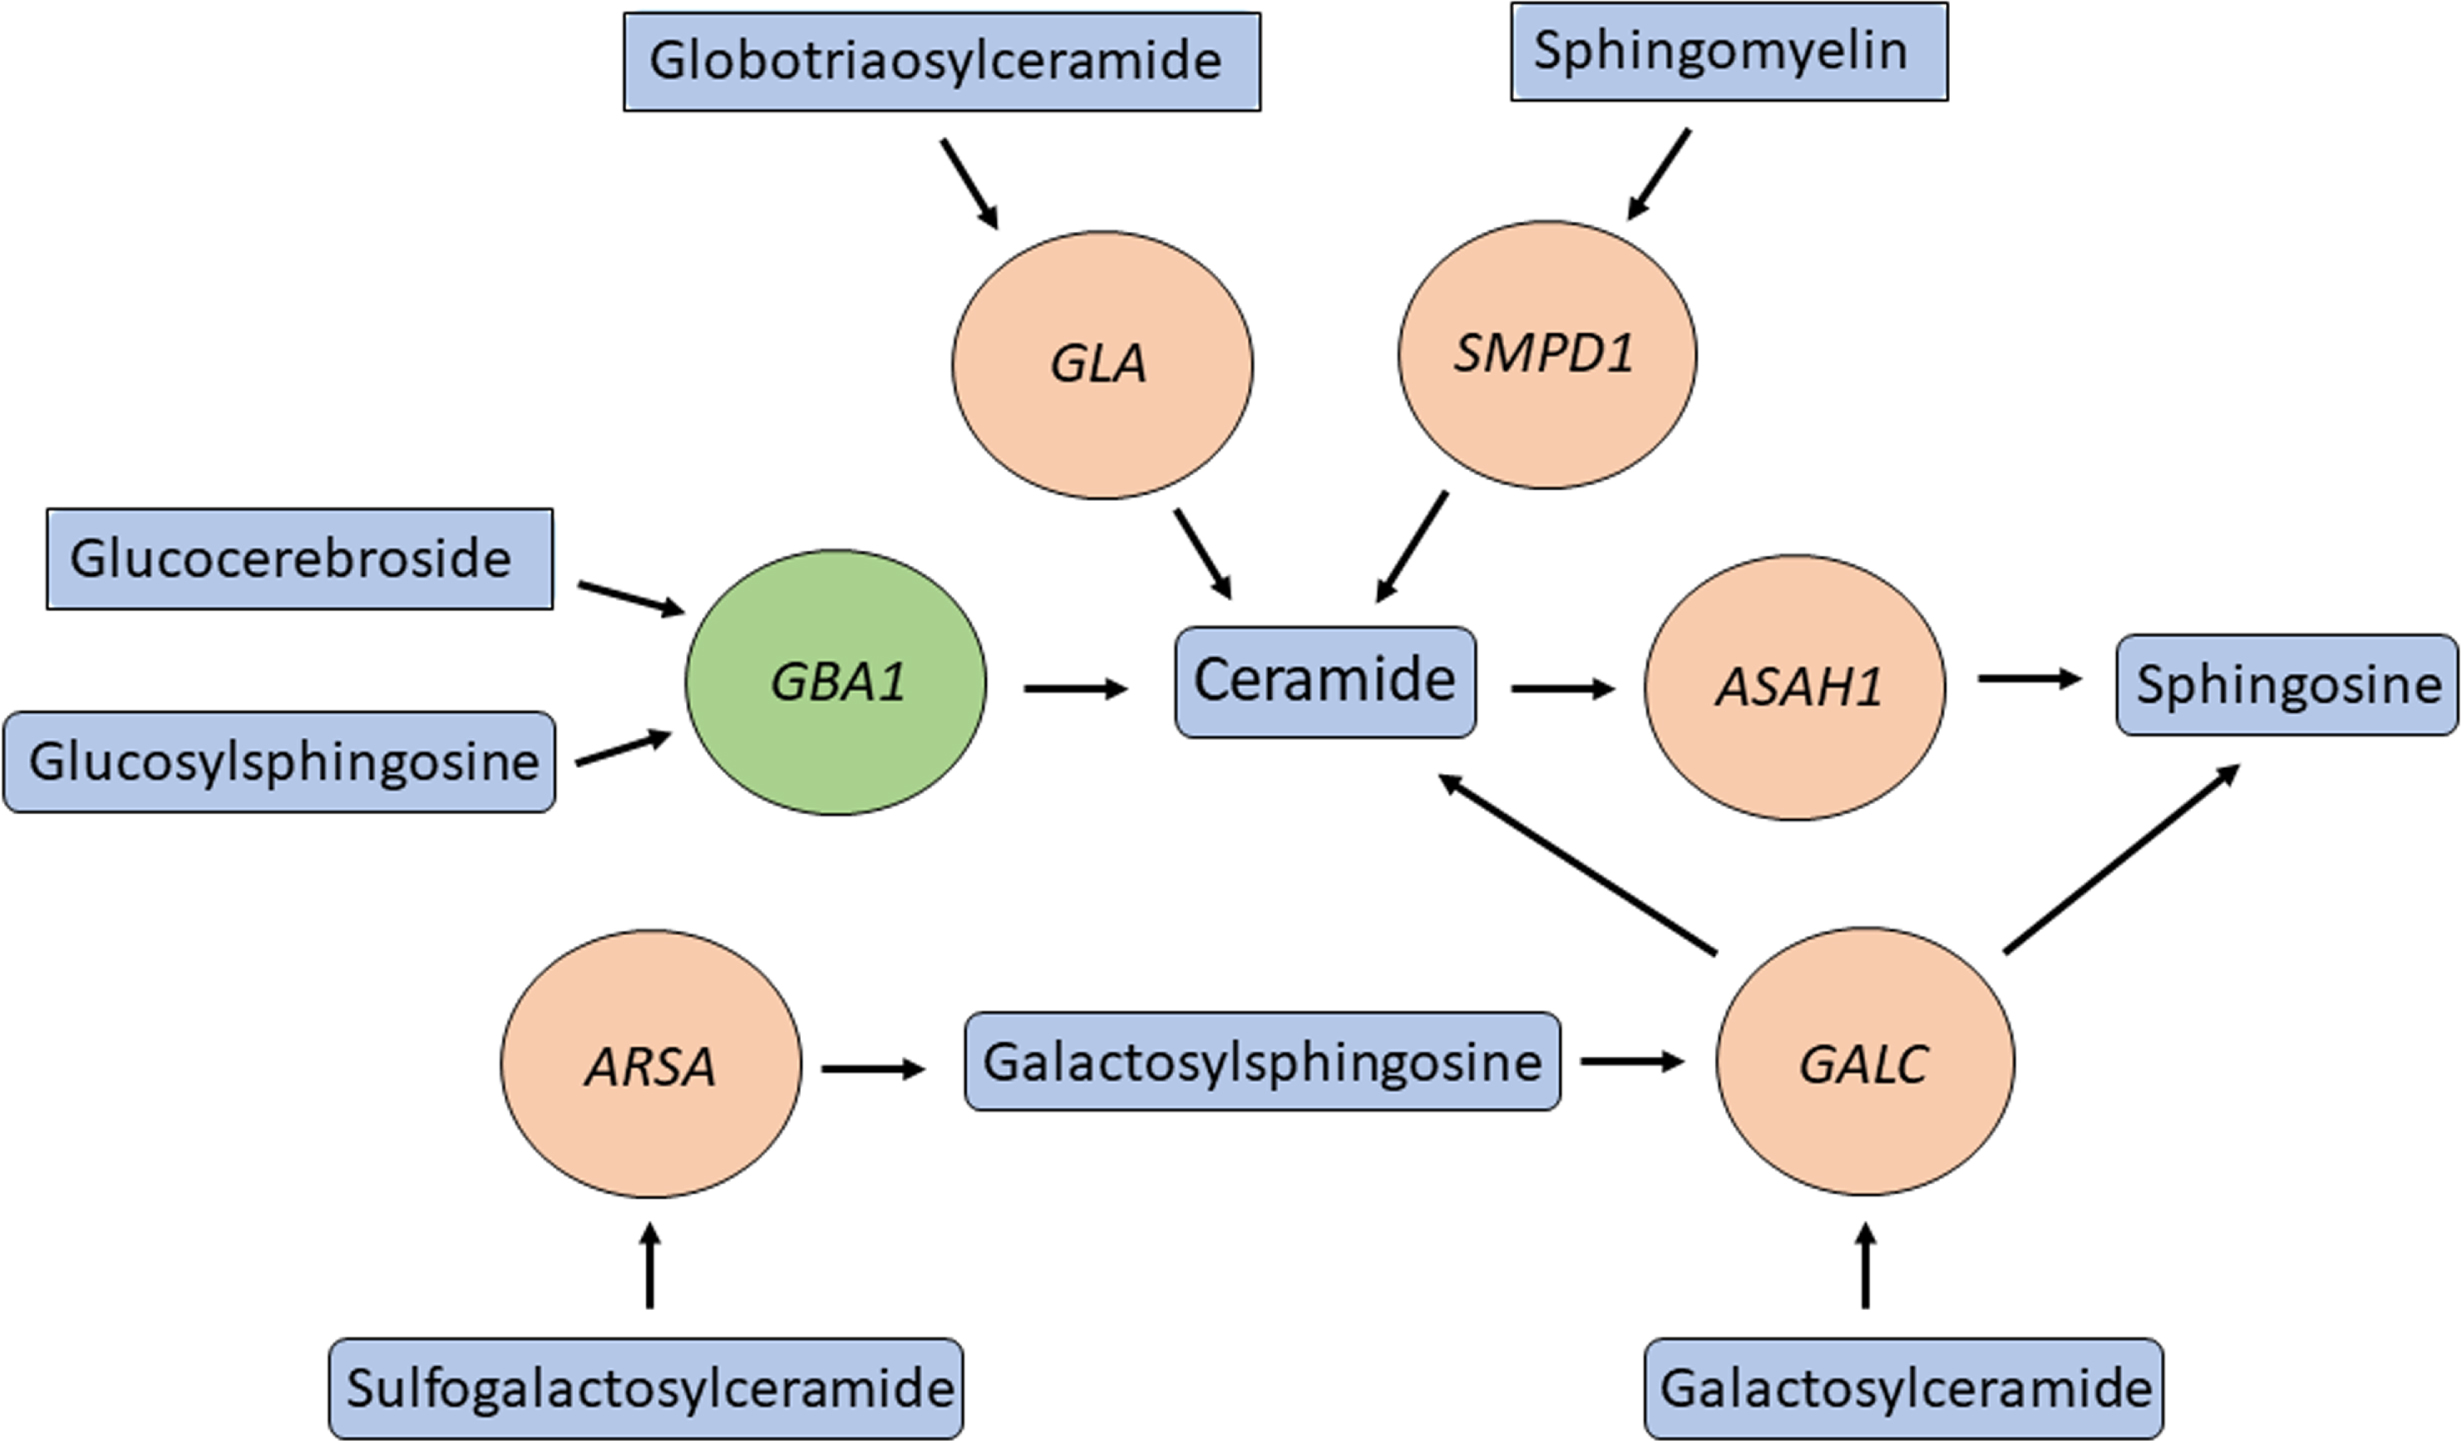 Multiple genes involved in ceramide metabolism and in PD. GBA1 (green circle) is one of many genes (orange circles) encoding for enzymes in the ceramide metabolism pathway that are both responsible for a lysosomal storage disease and modifying the risk of PD. Important substrates and products of these enzymes are in blue rectangles.